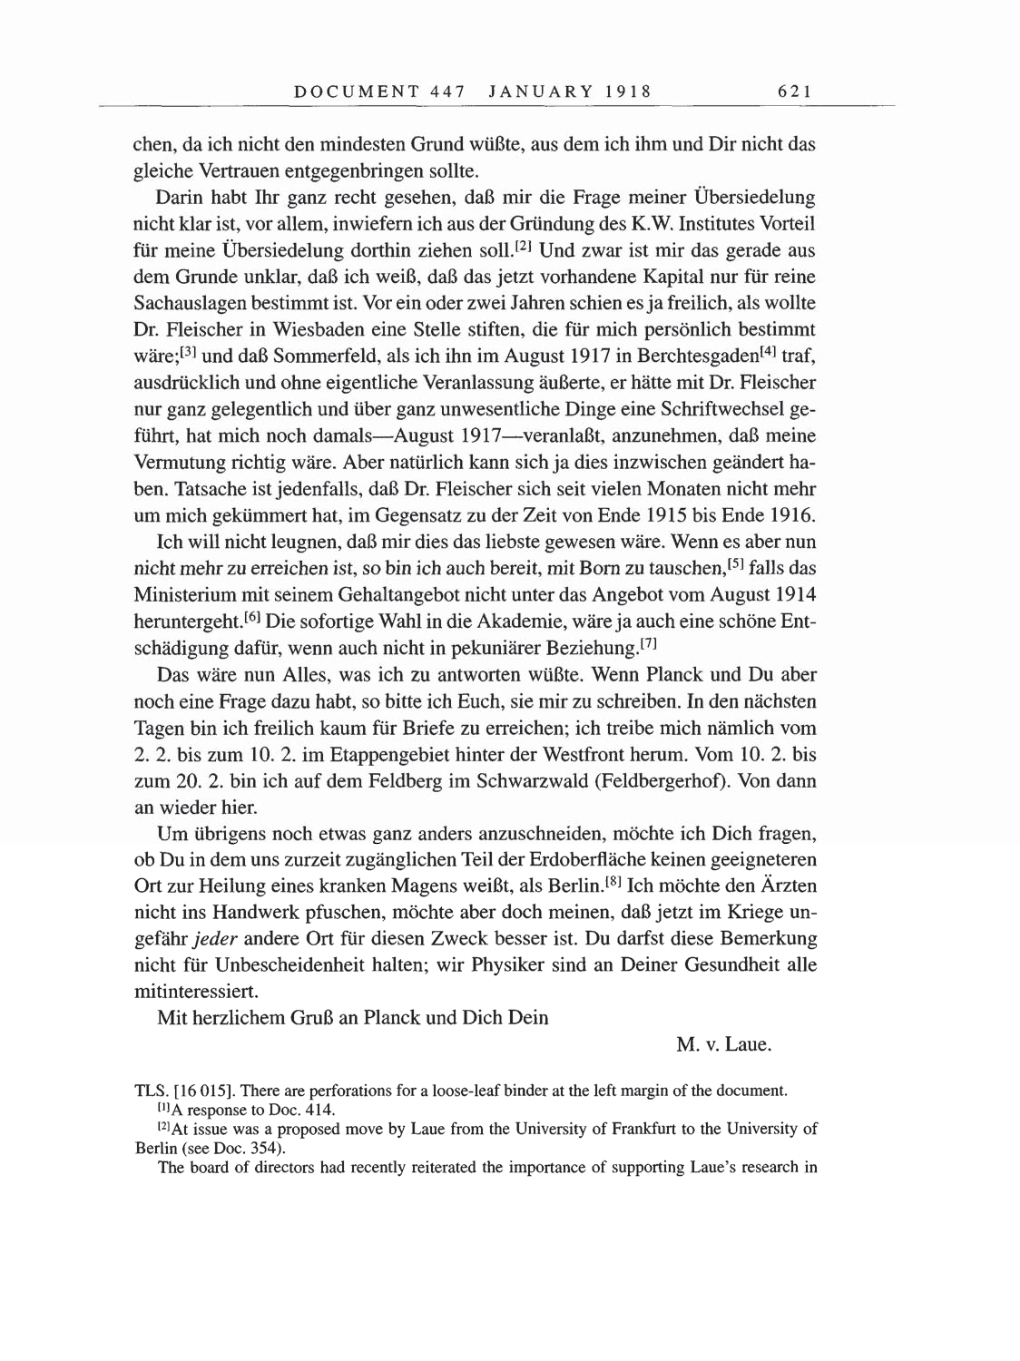 Volume 8, Part B: The Berlin Years: Correspondence 1918 page 621